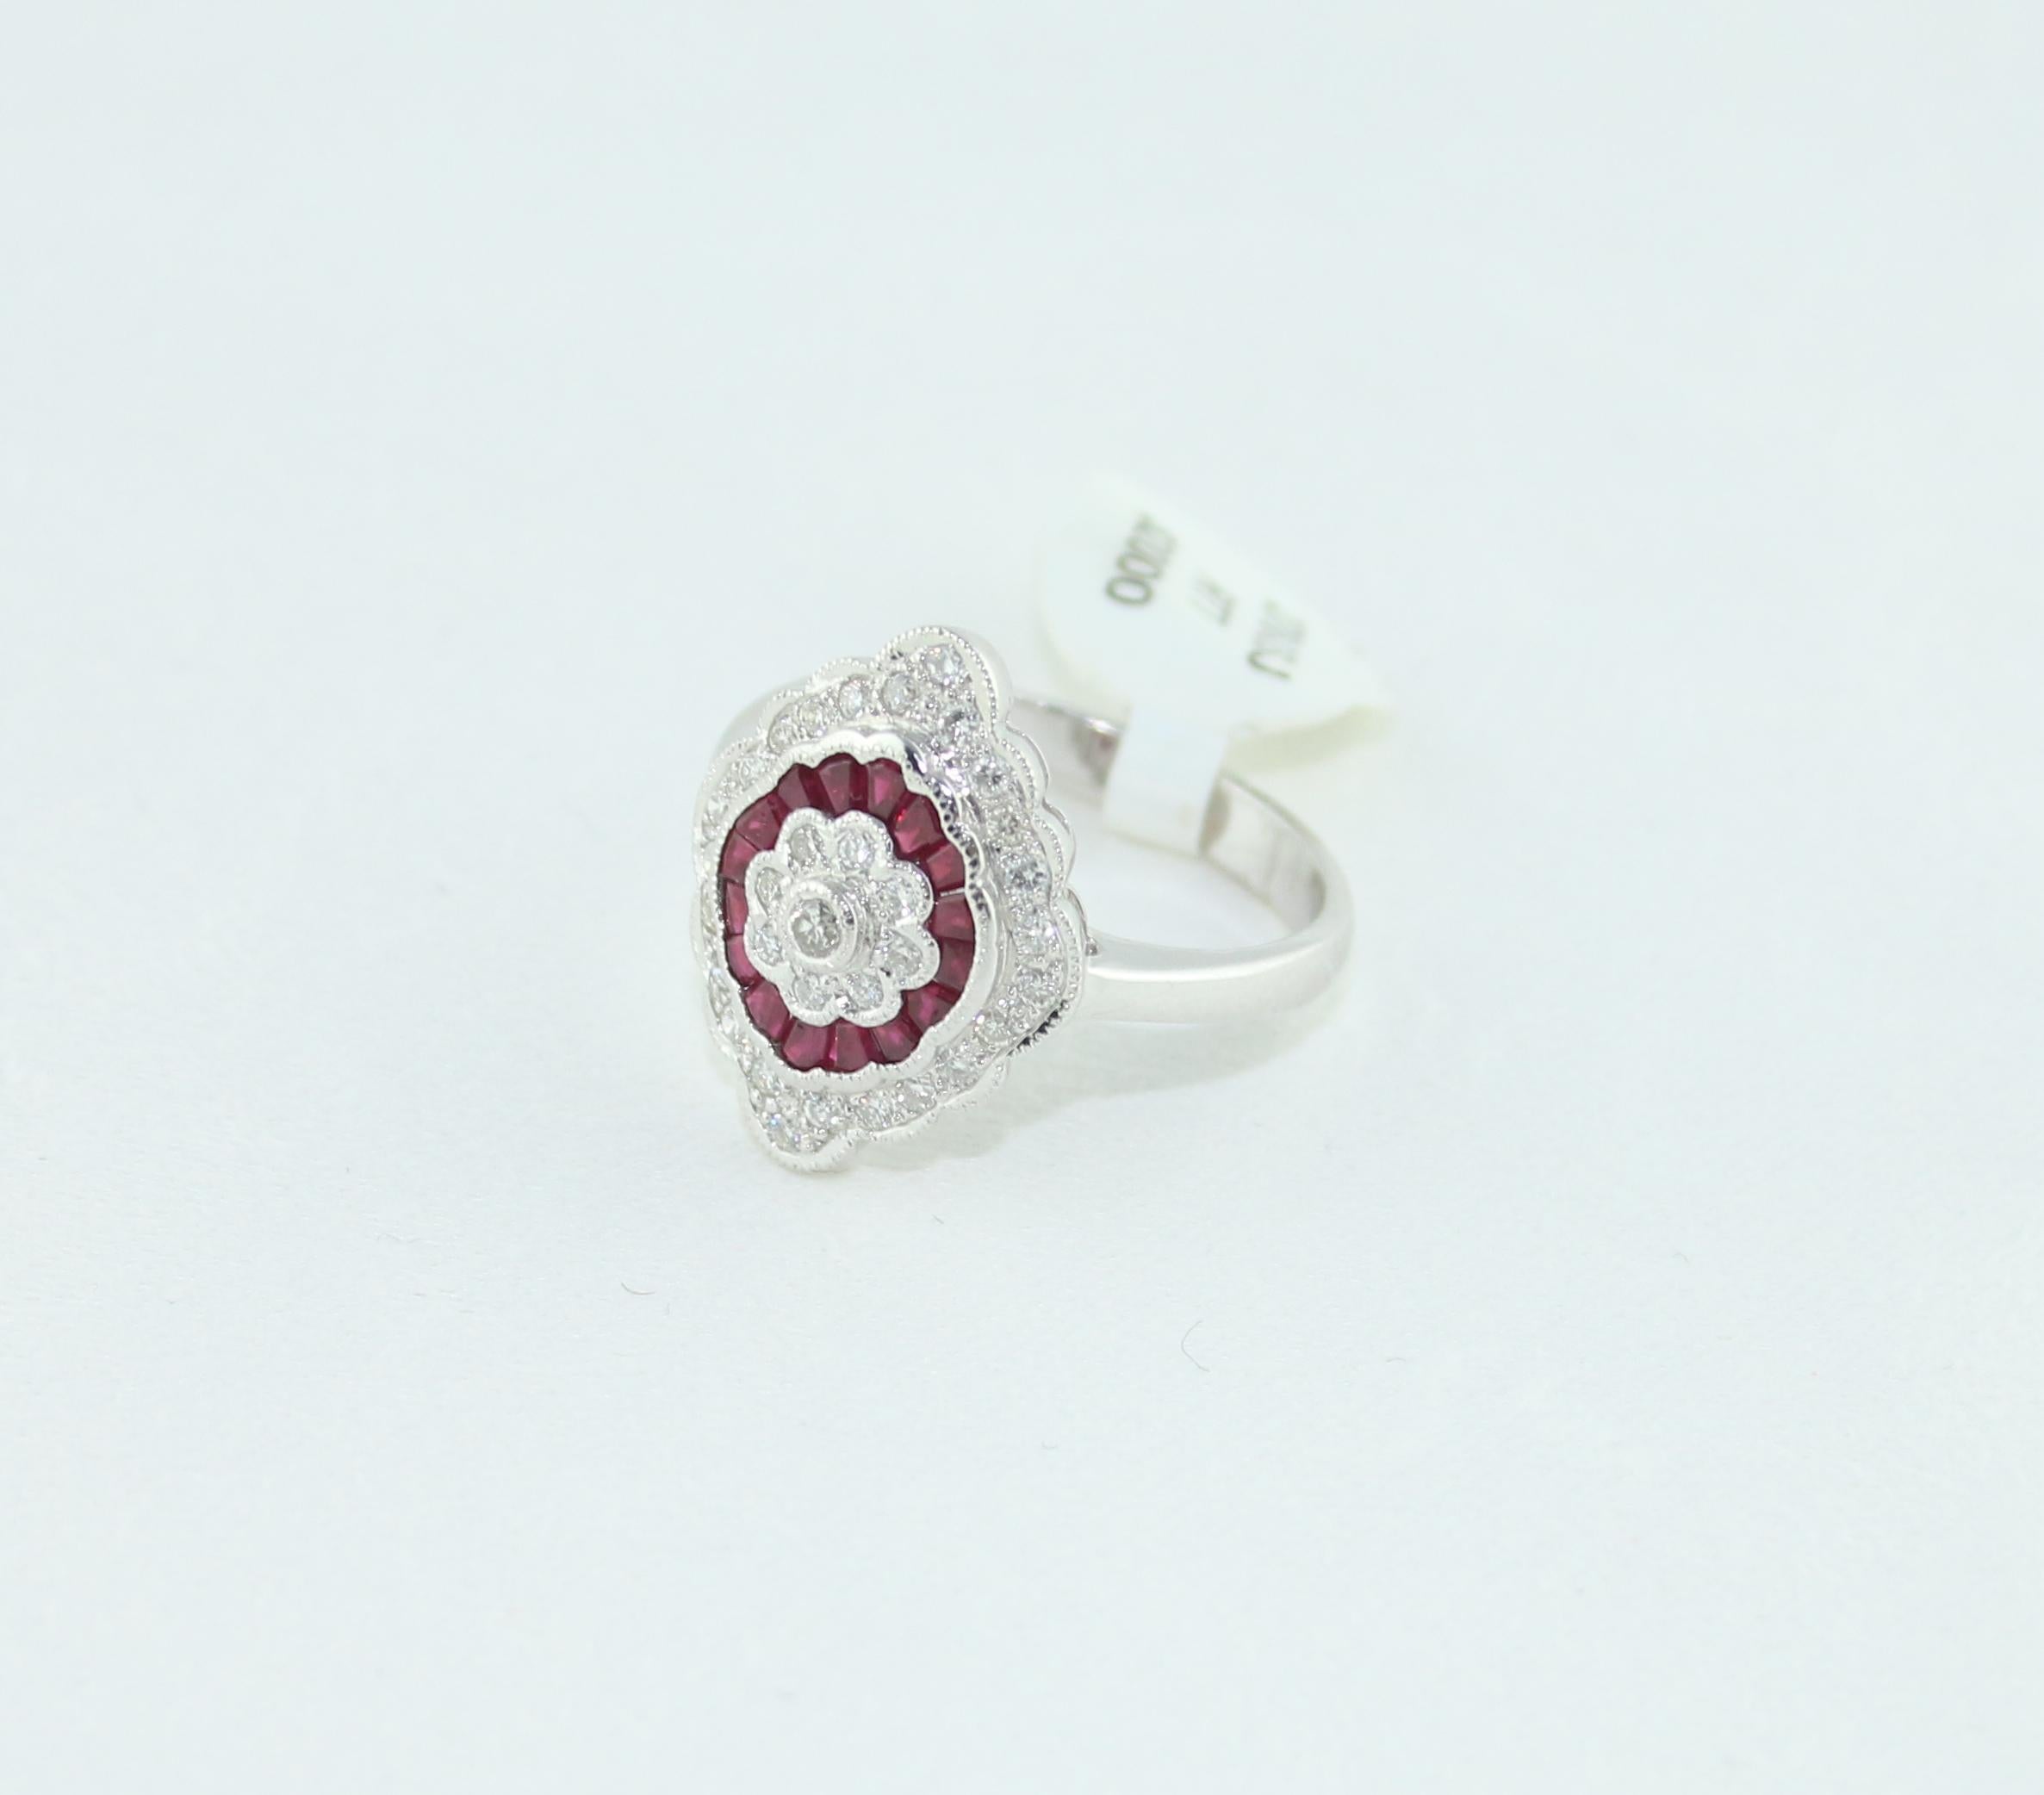 0.74 Carat Ruby Diamond Gold Ring For Sale 2